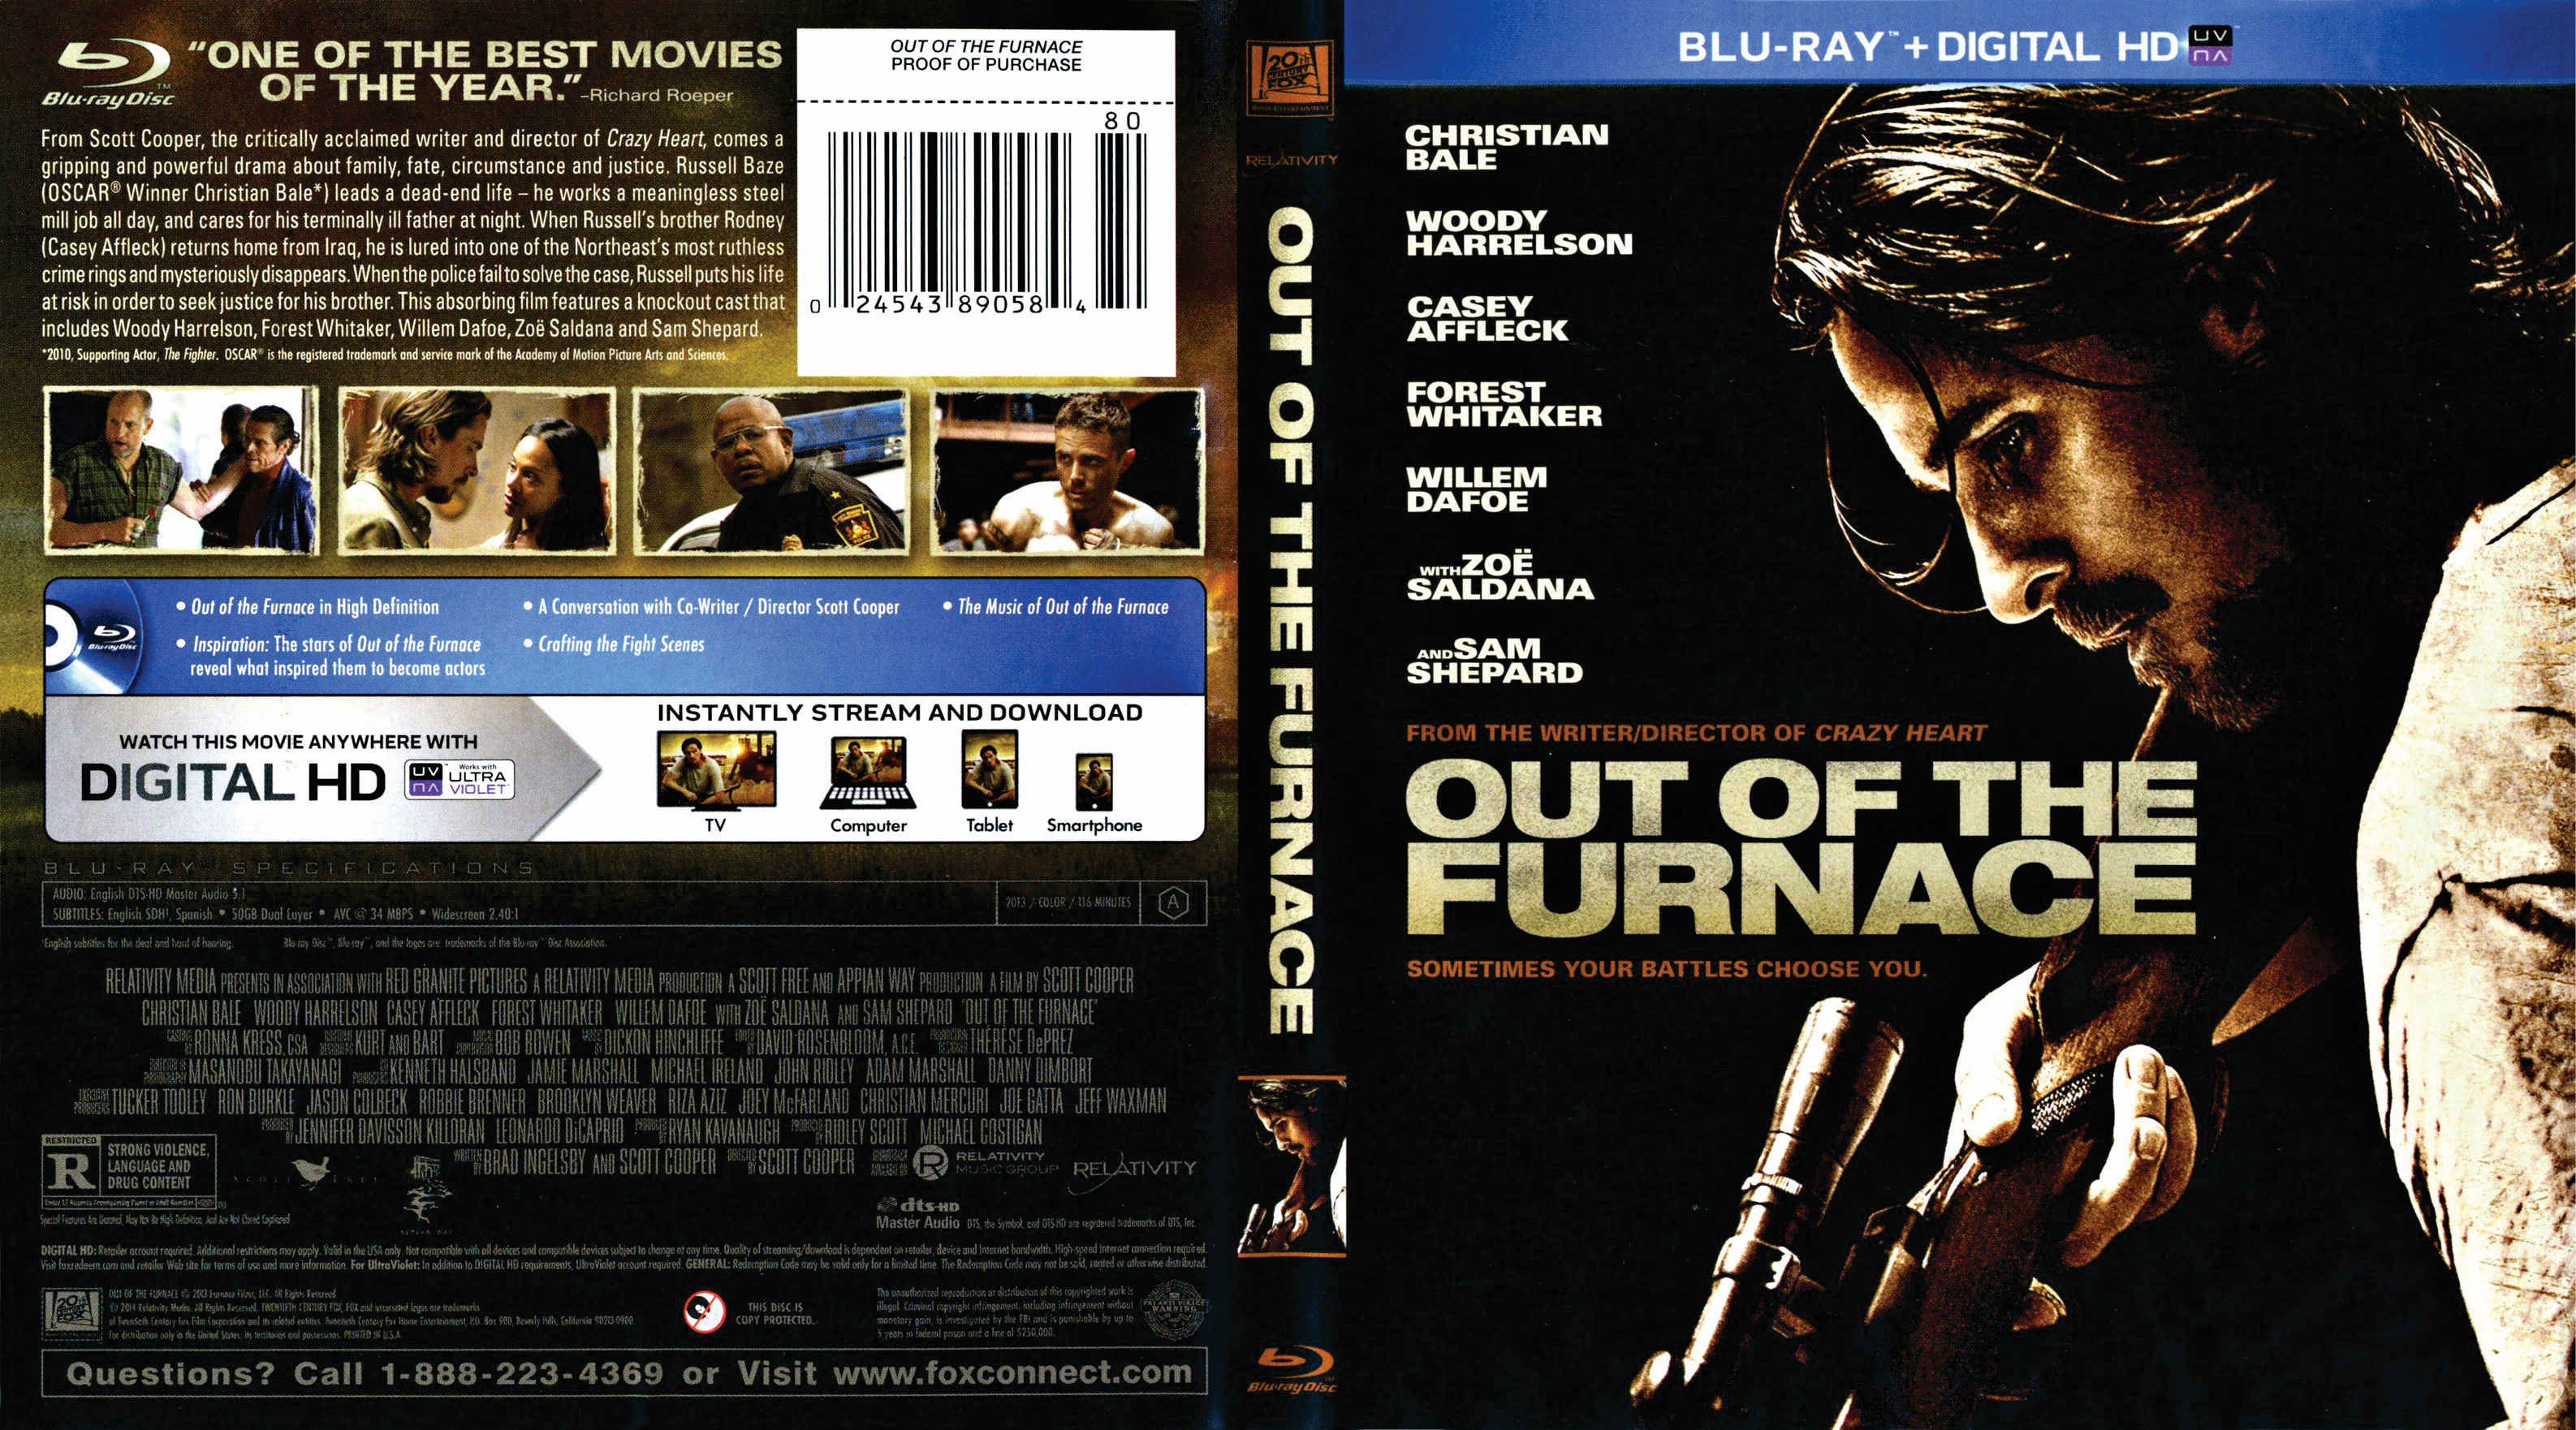 Jaquette DVD Out of the furnace - Les Brasiers de la Colre Zone 1 (BLU-RAY)